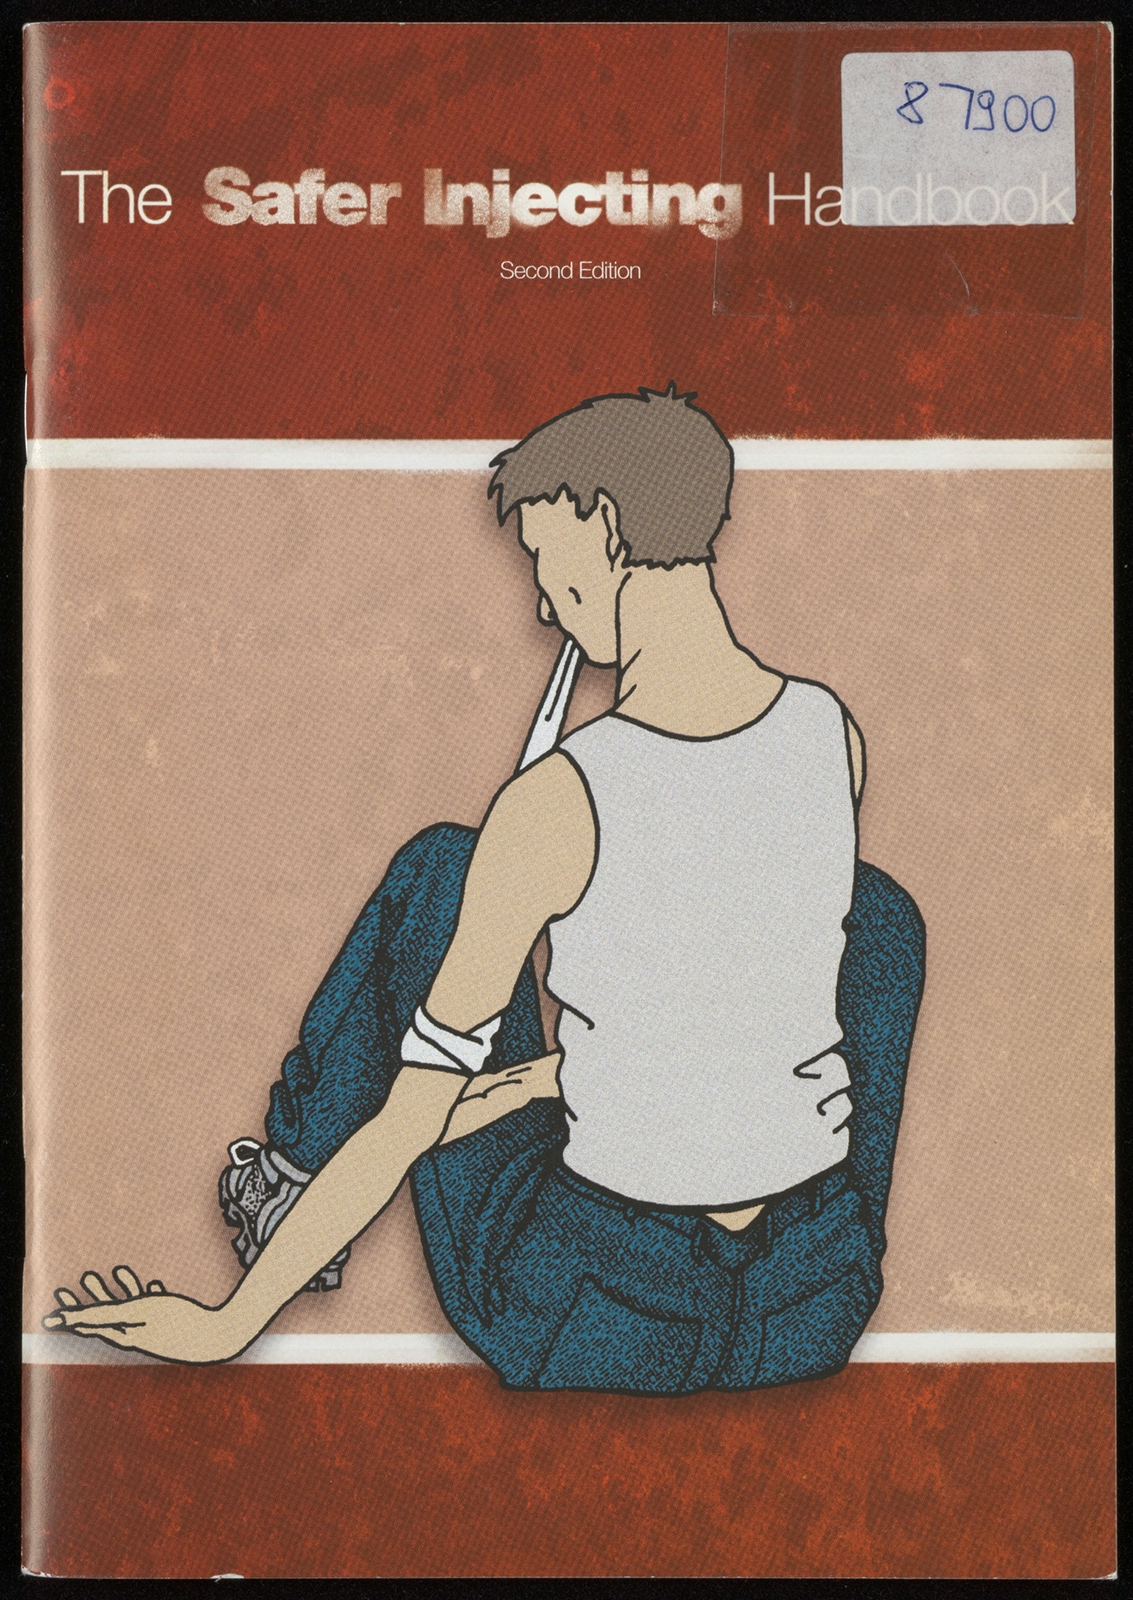 Red and pink pamphlet front cover, with an illustration of a person sitting down with their back to us, preparing to inject.